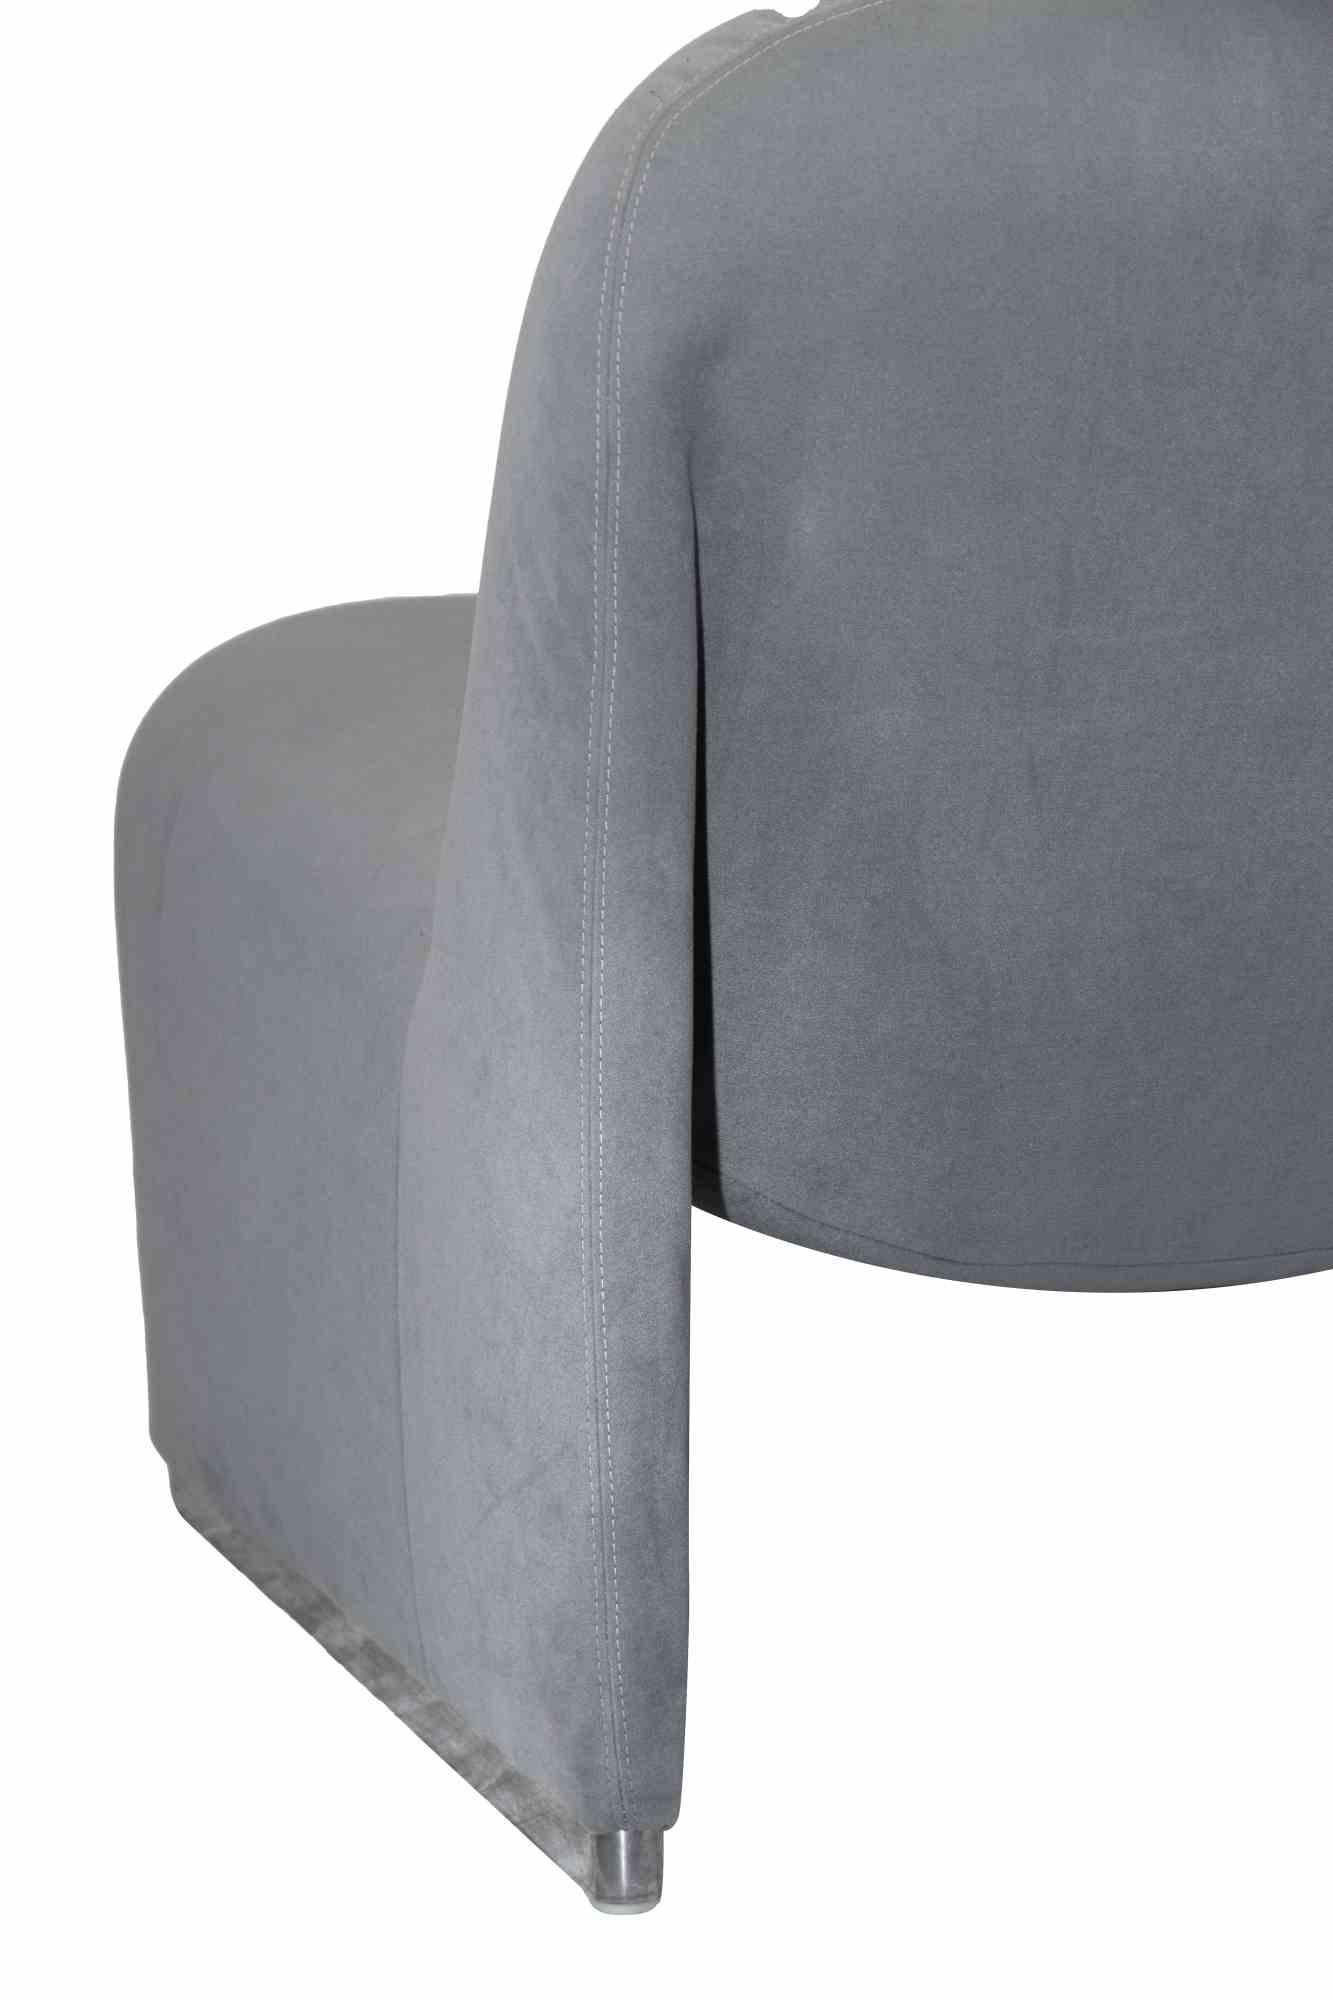 Pair of Alky Armchairs by Giancarlo Piretti for Castelli.

Produced by Anonima Castelli in 1972.

Base in brushed steel, padding in foam rubber, covering in velvet.

L67 x P85 x H67 cm.

Very good conditions.